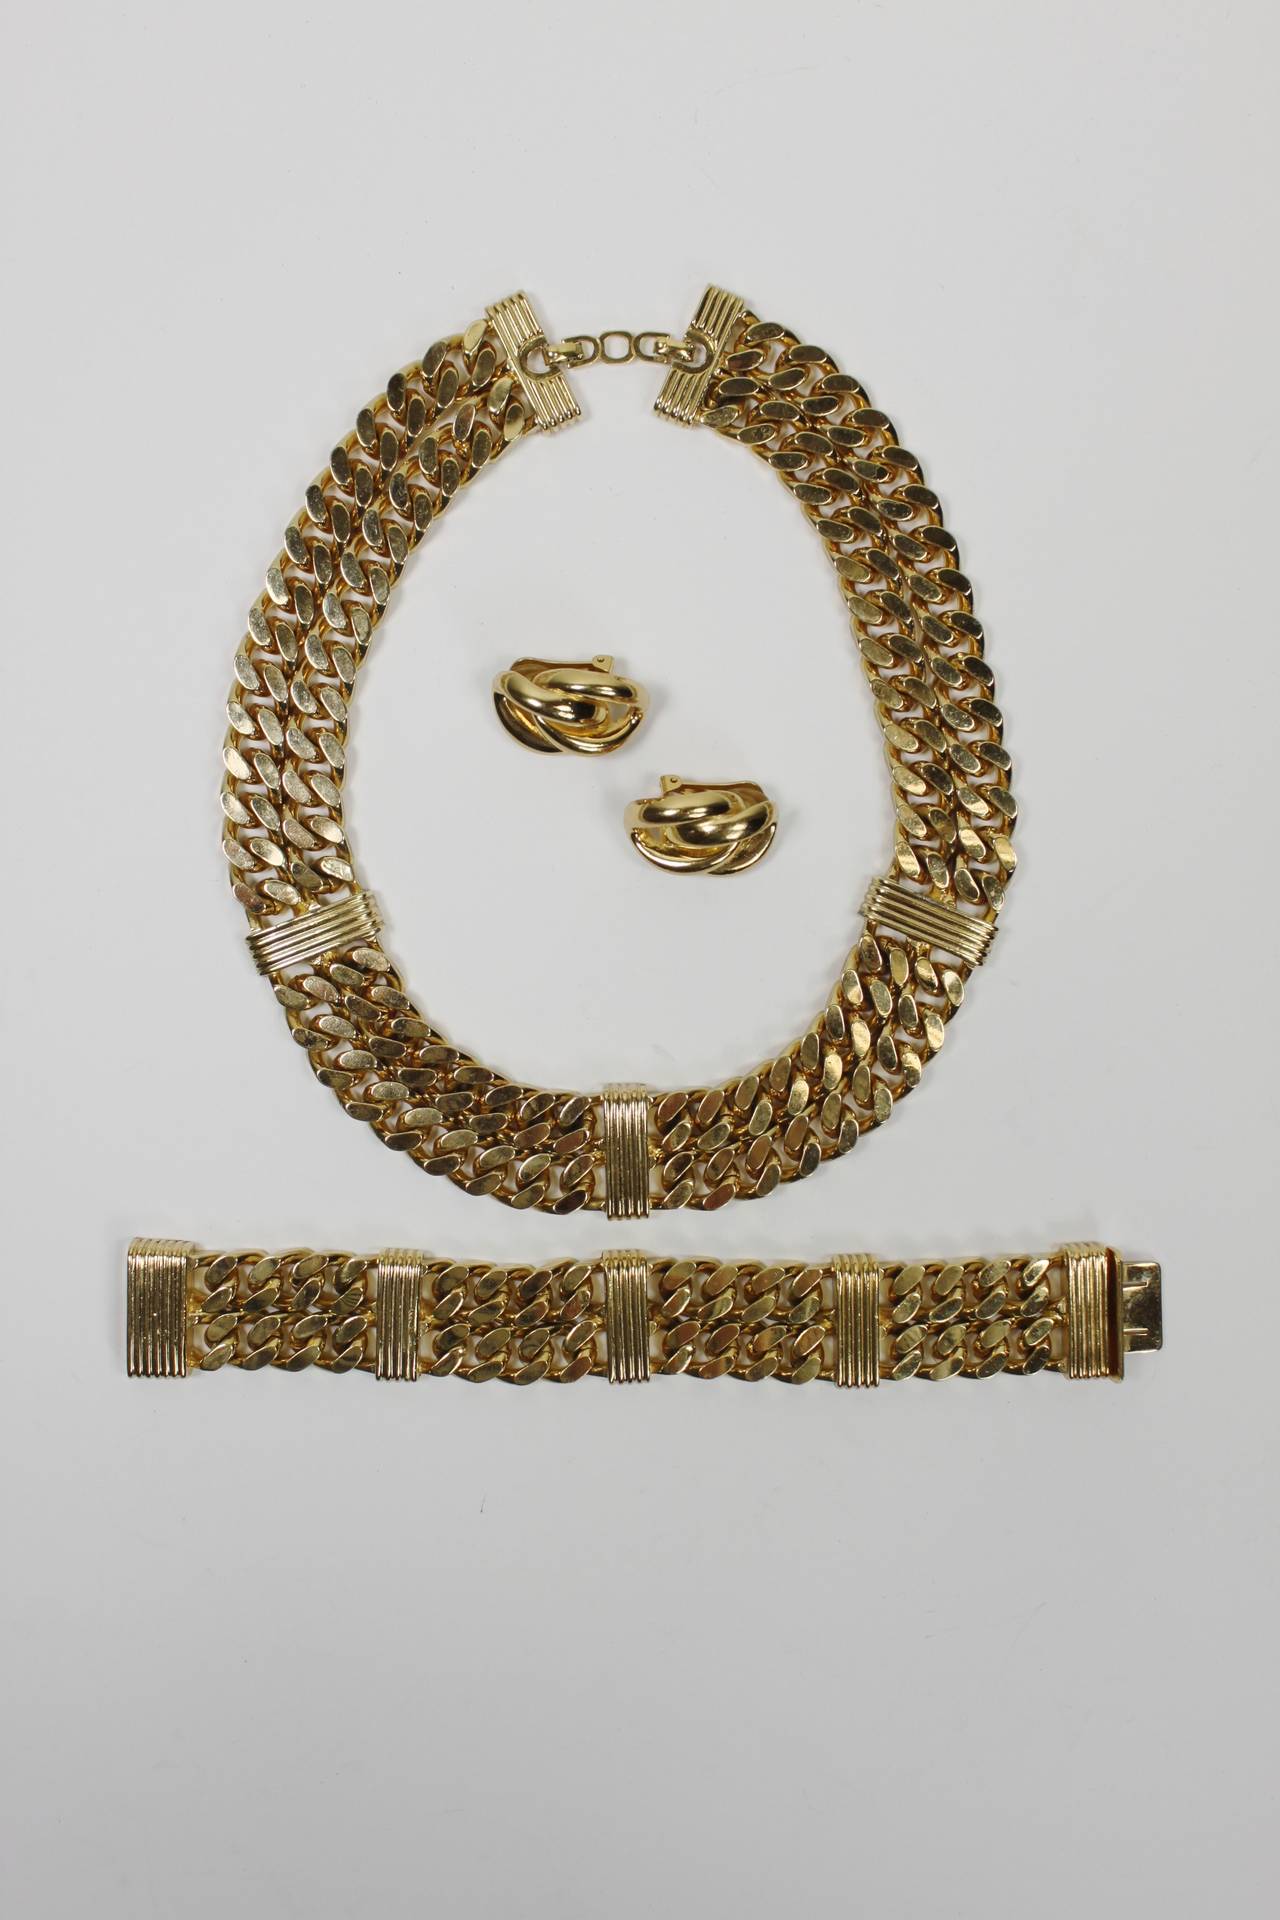 A stunning costume jewelry set from Christian Dior. A necklace, bracelet, and earrings are done in a fabulous, glimmering gold-tone chain link. The metal is substantial and feels wonderful on. The gold-tone is gorgeously polished and